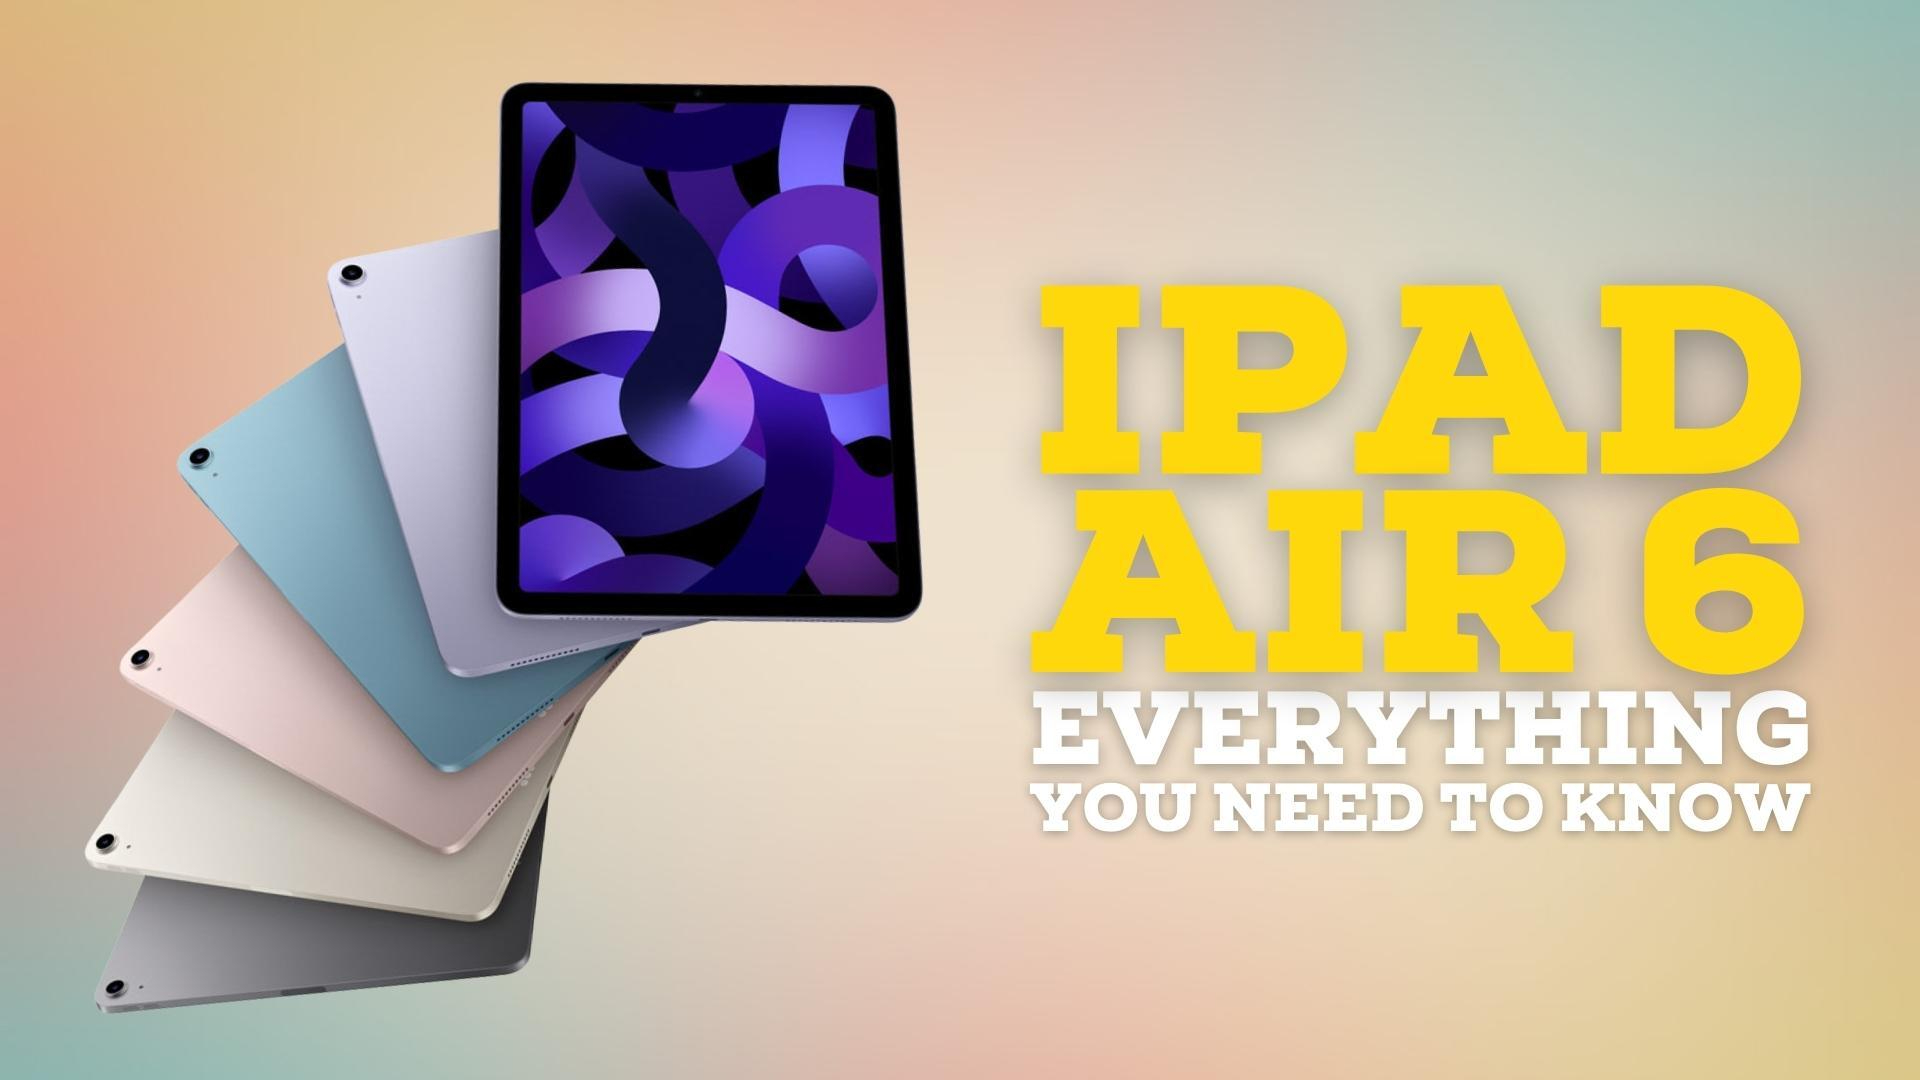 Apple iPad Air 6: Release date rumors, news, and more | iMore